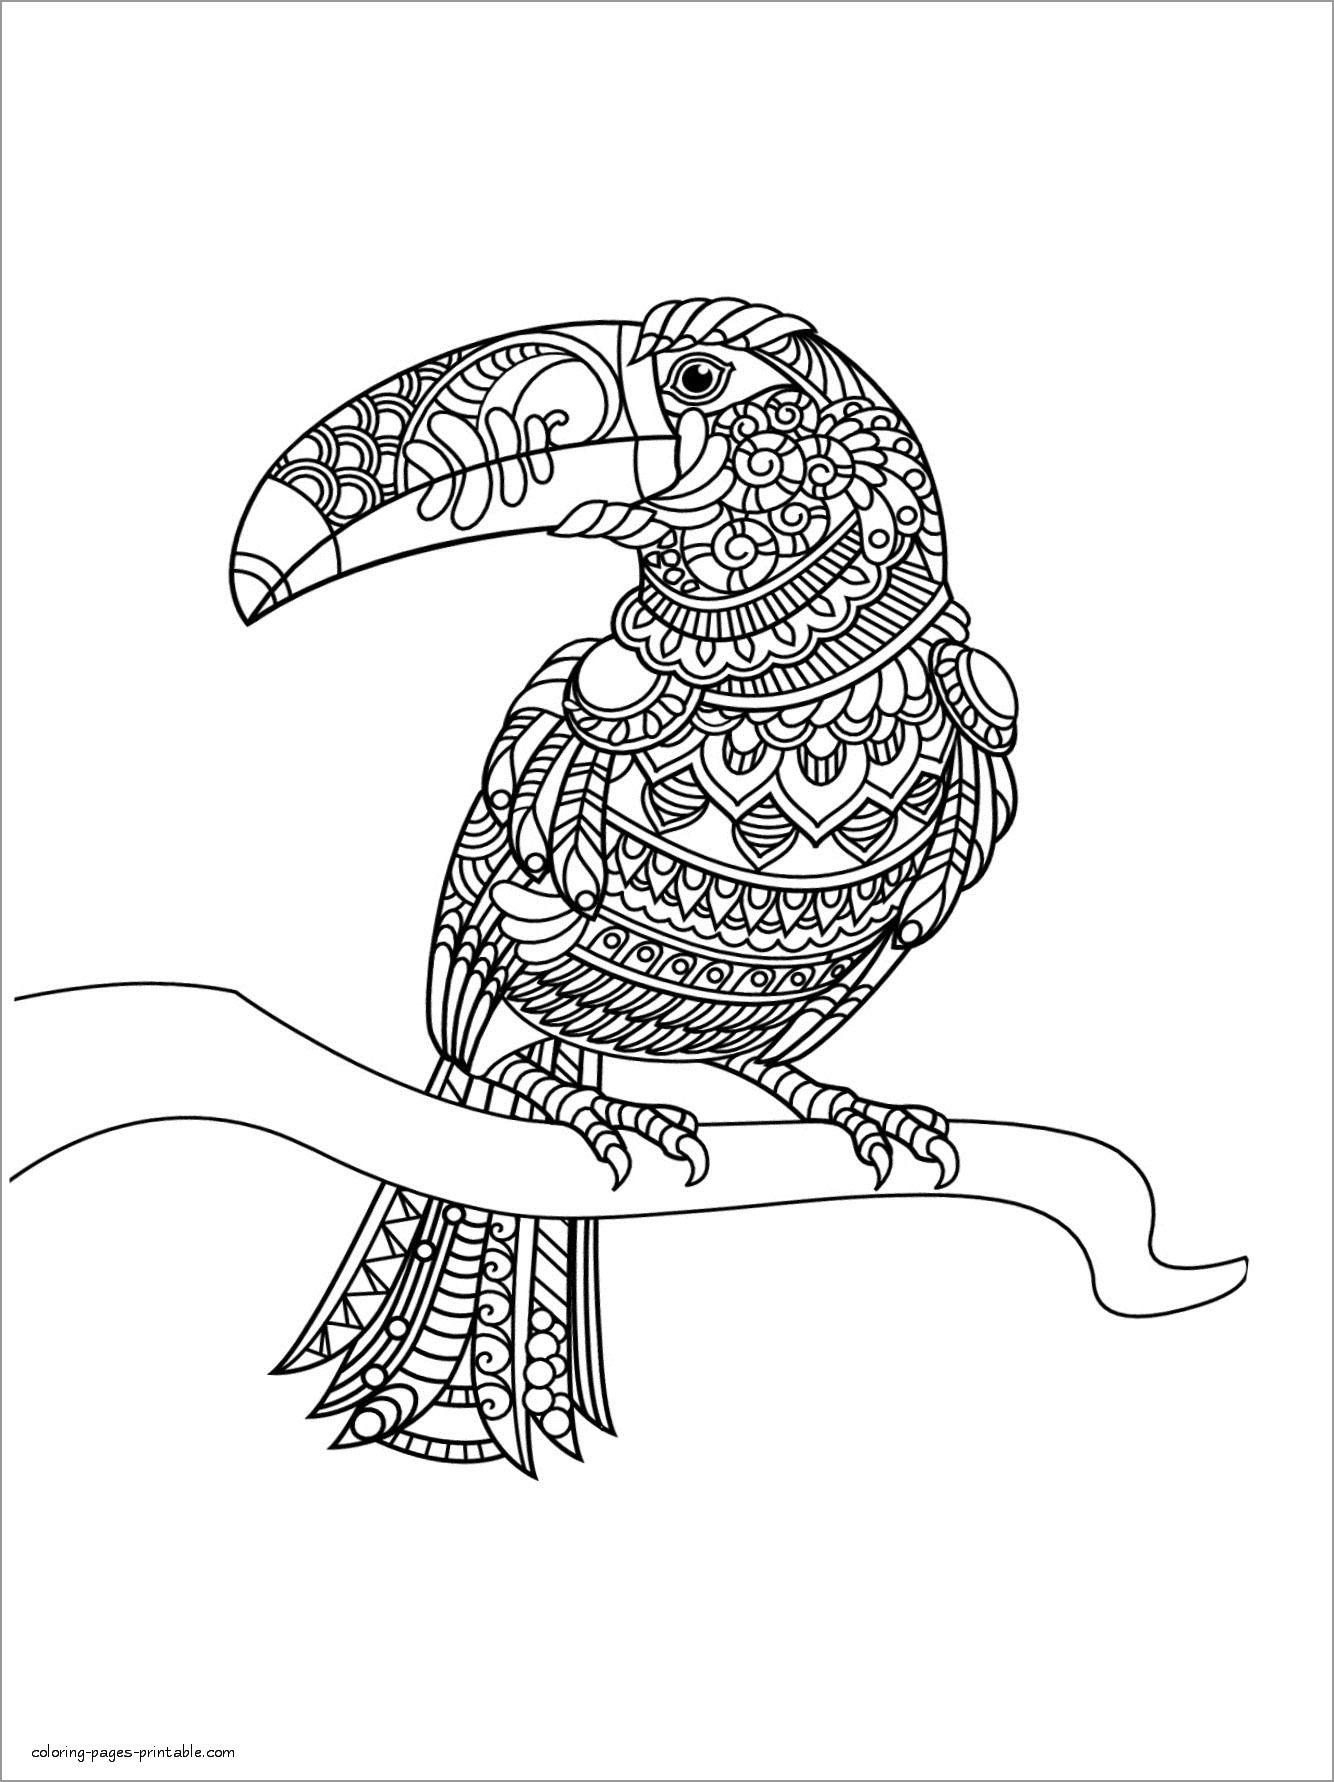 Toucan Coloring Page for Adults